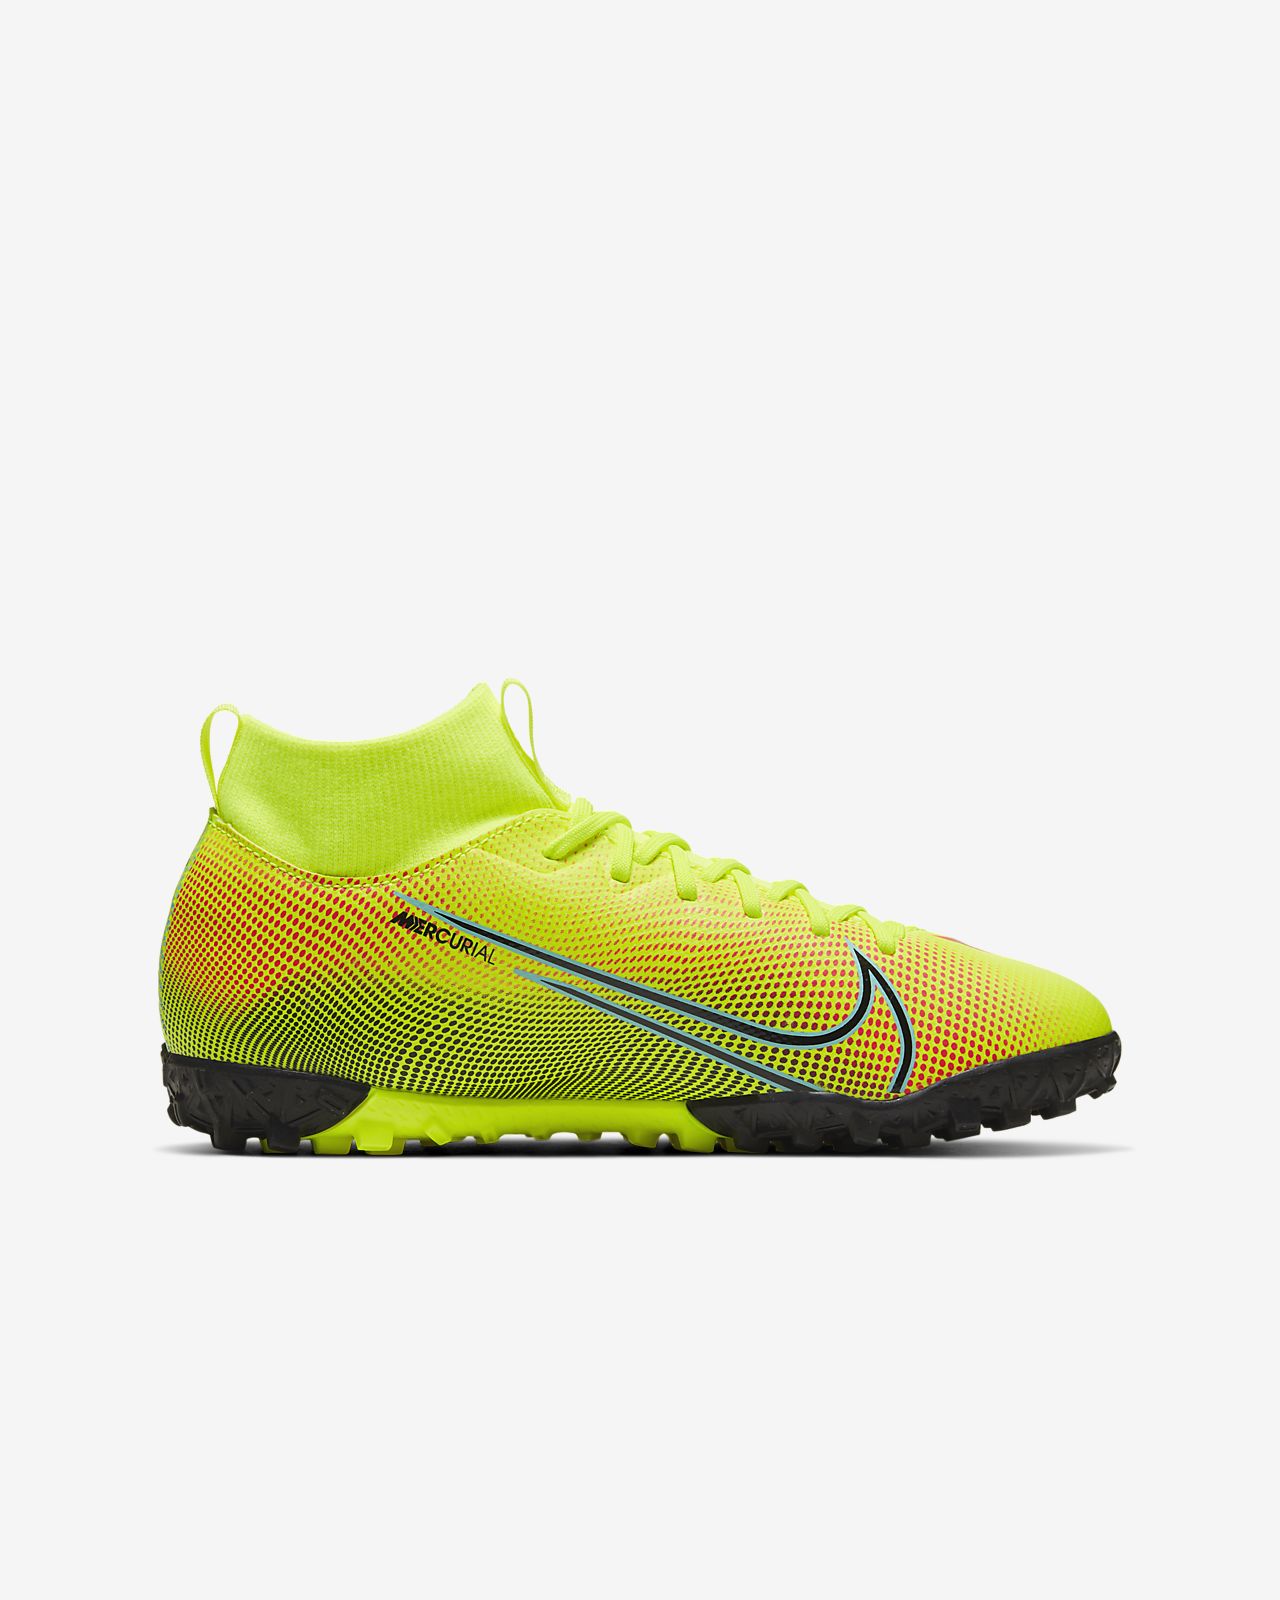 Nike Mercurial Superfly VII Academy SG PRO AC Blue. TodayPC